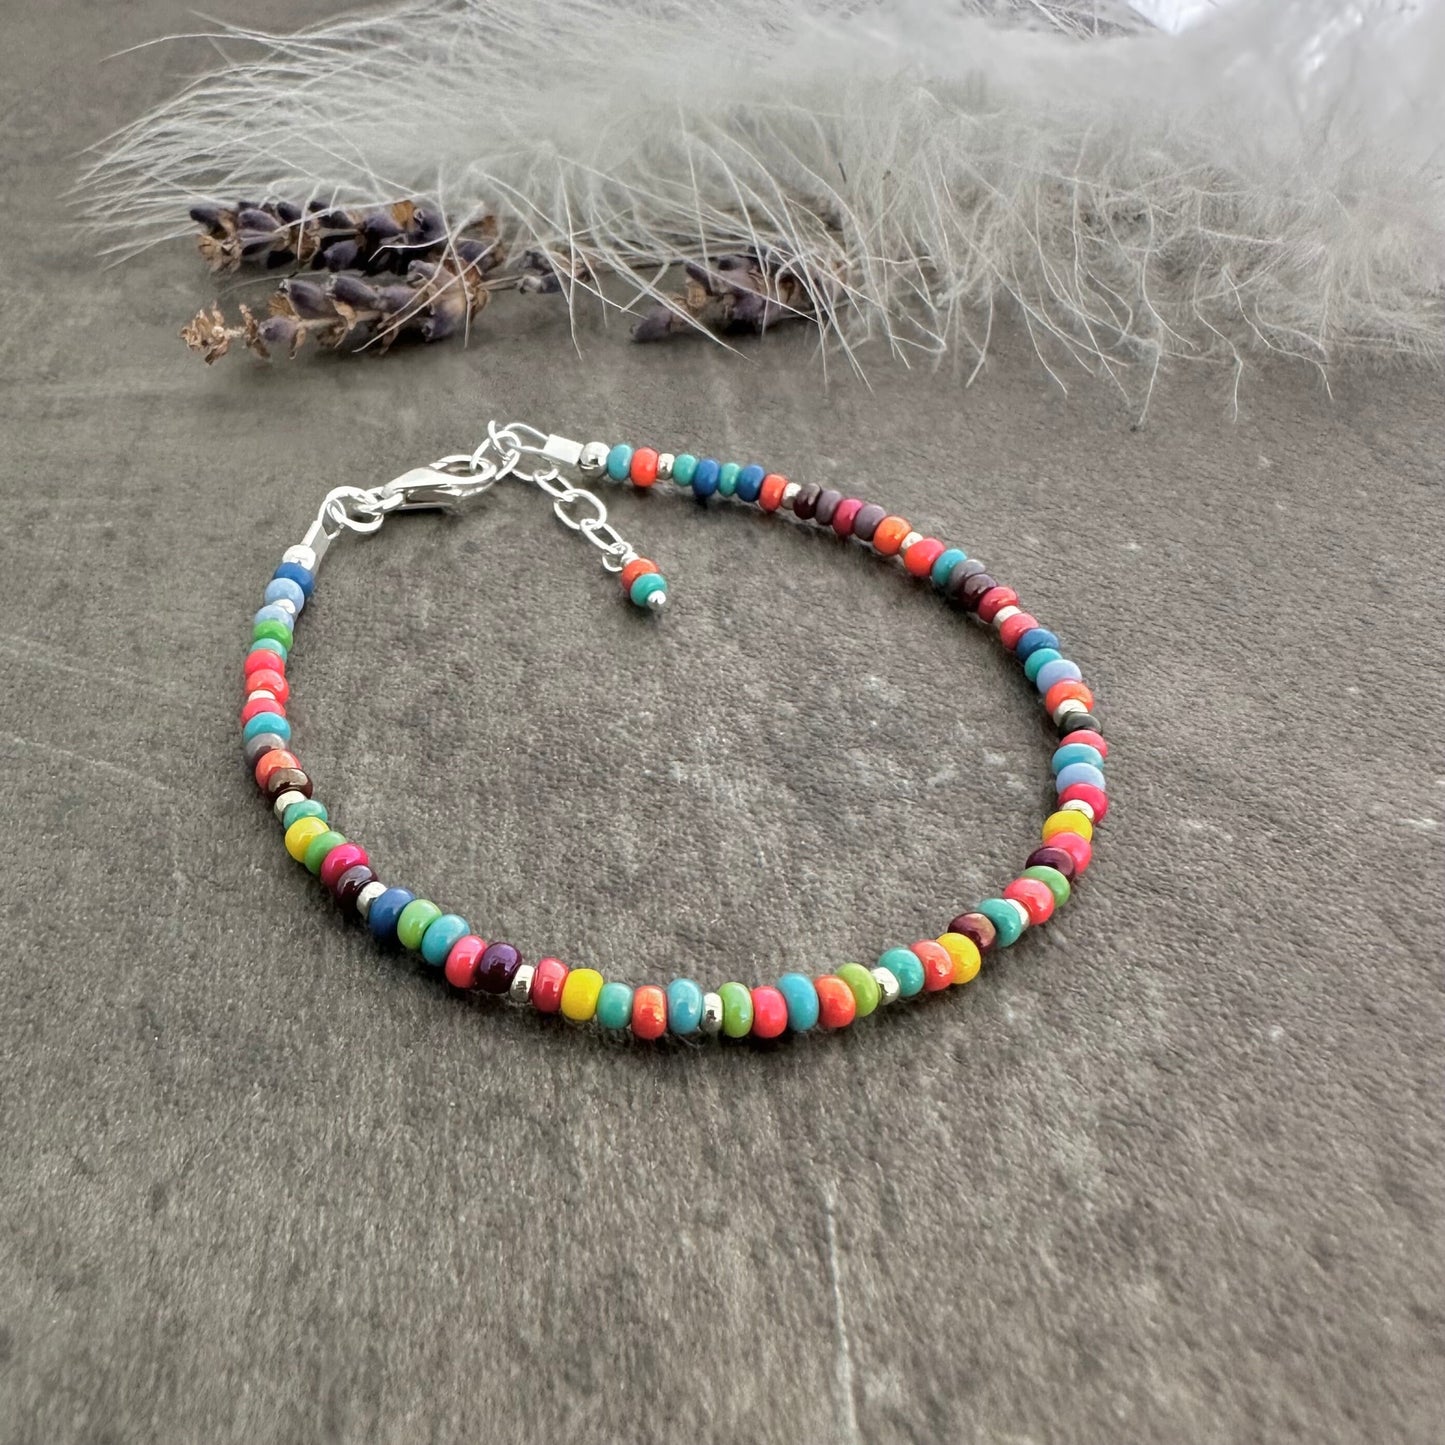 Colourful Summer Beaded Bracelet with seed beads